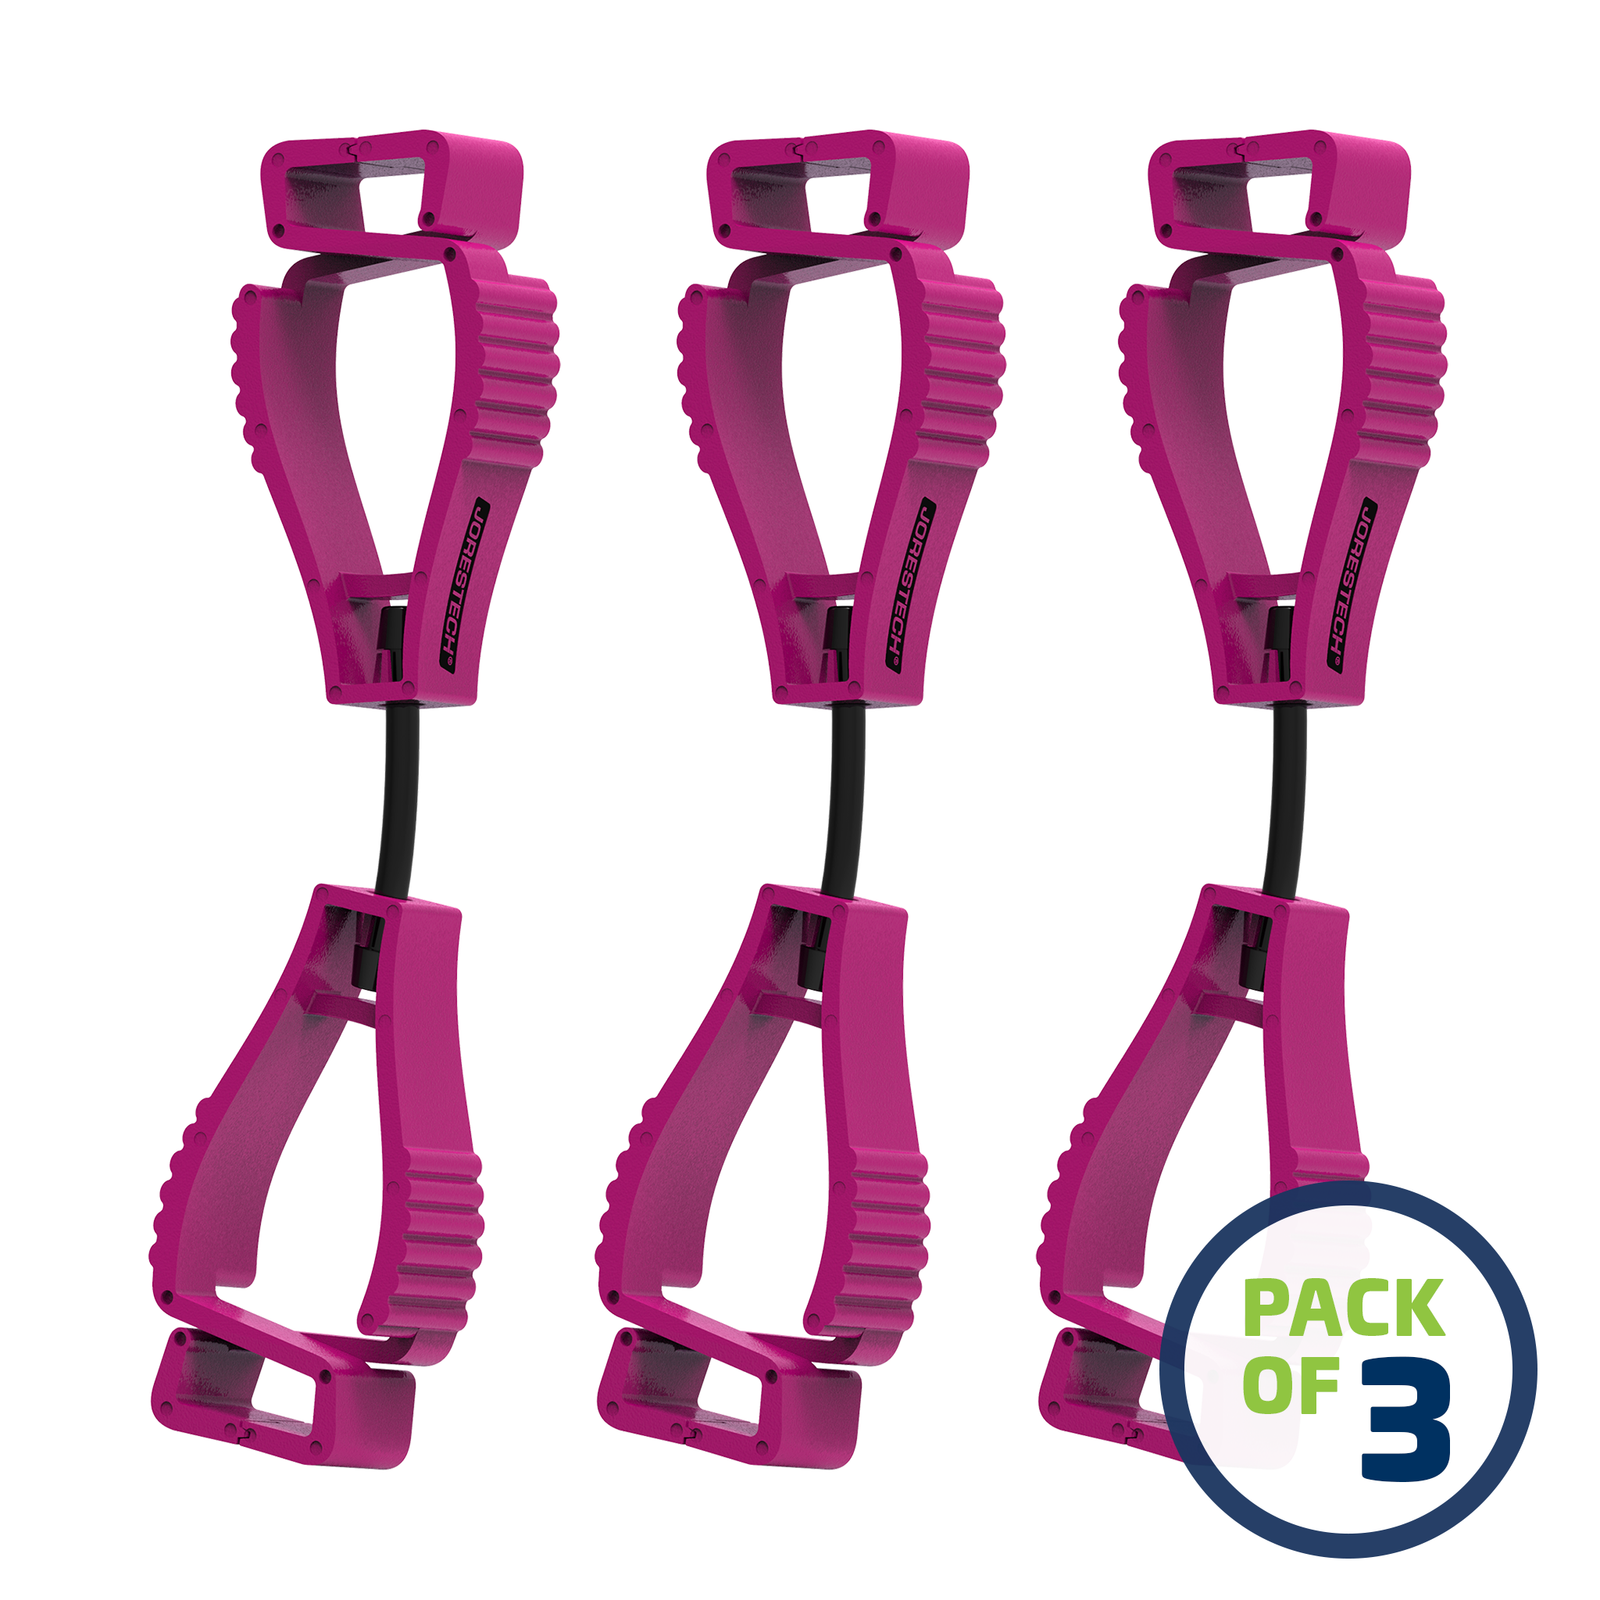 Pack of 3 Pink JORESTECH glove clip safety holders